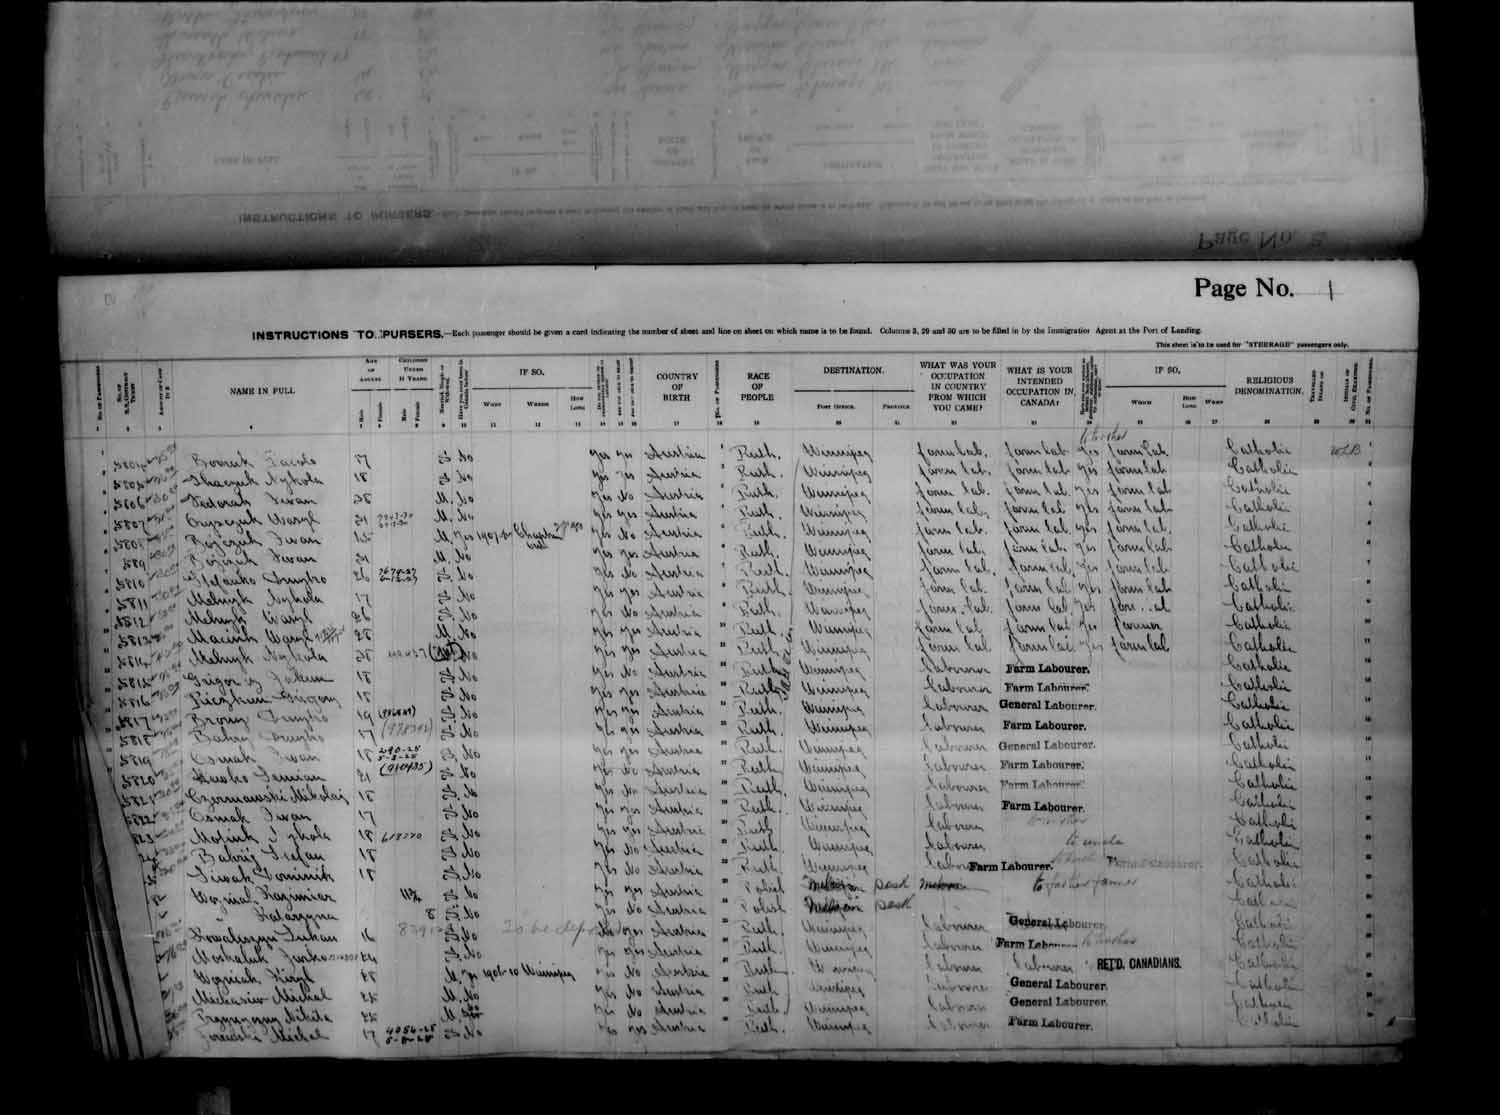 Digitized page of Passenger Lists for Image No.: e003686909